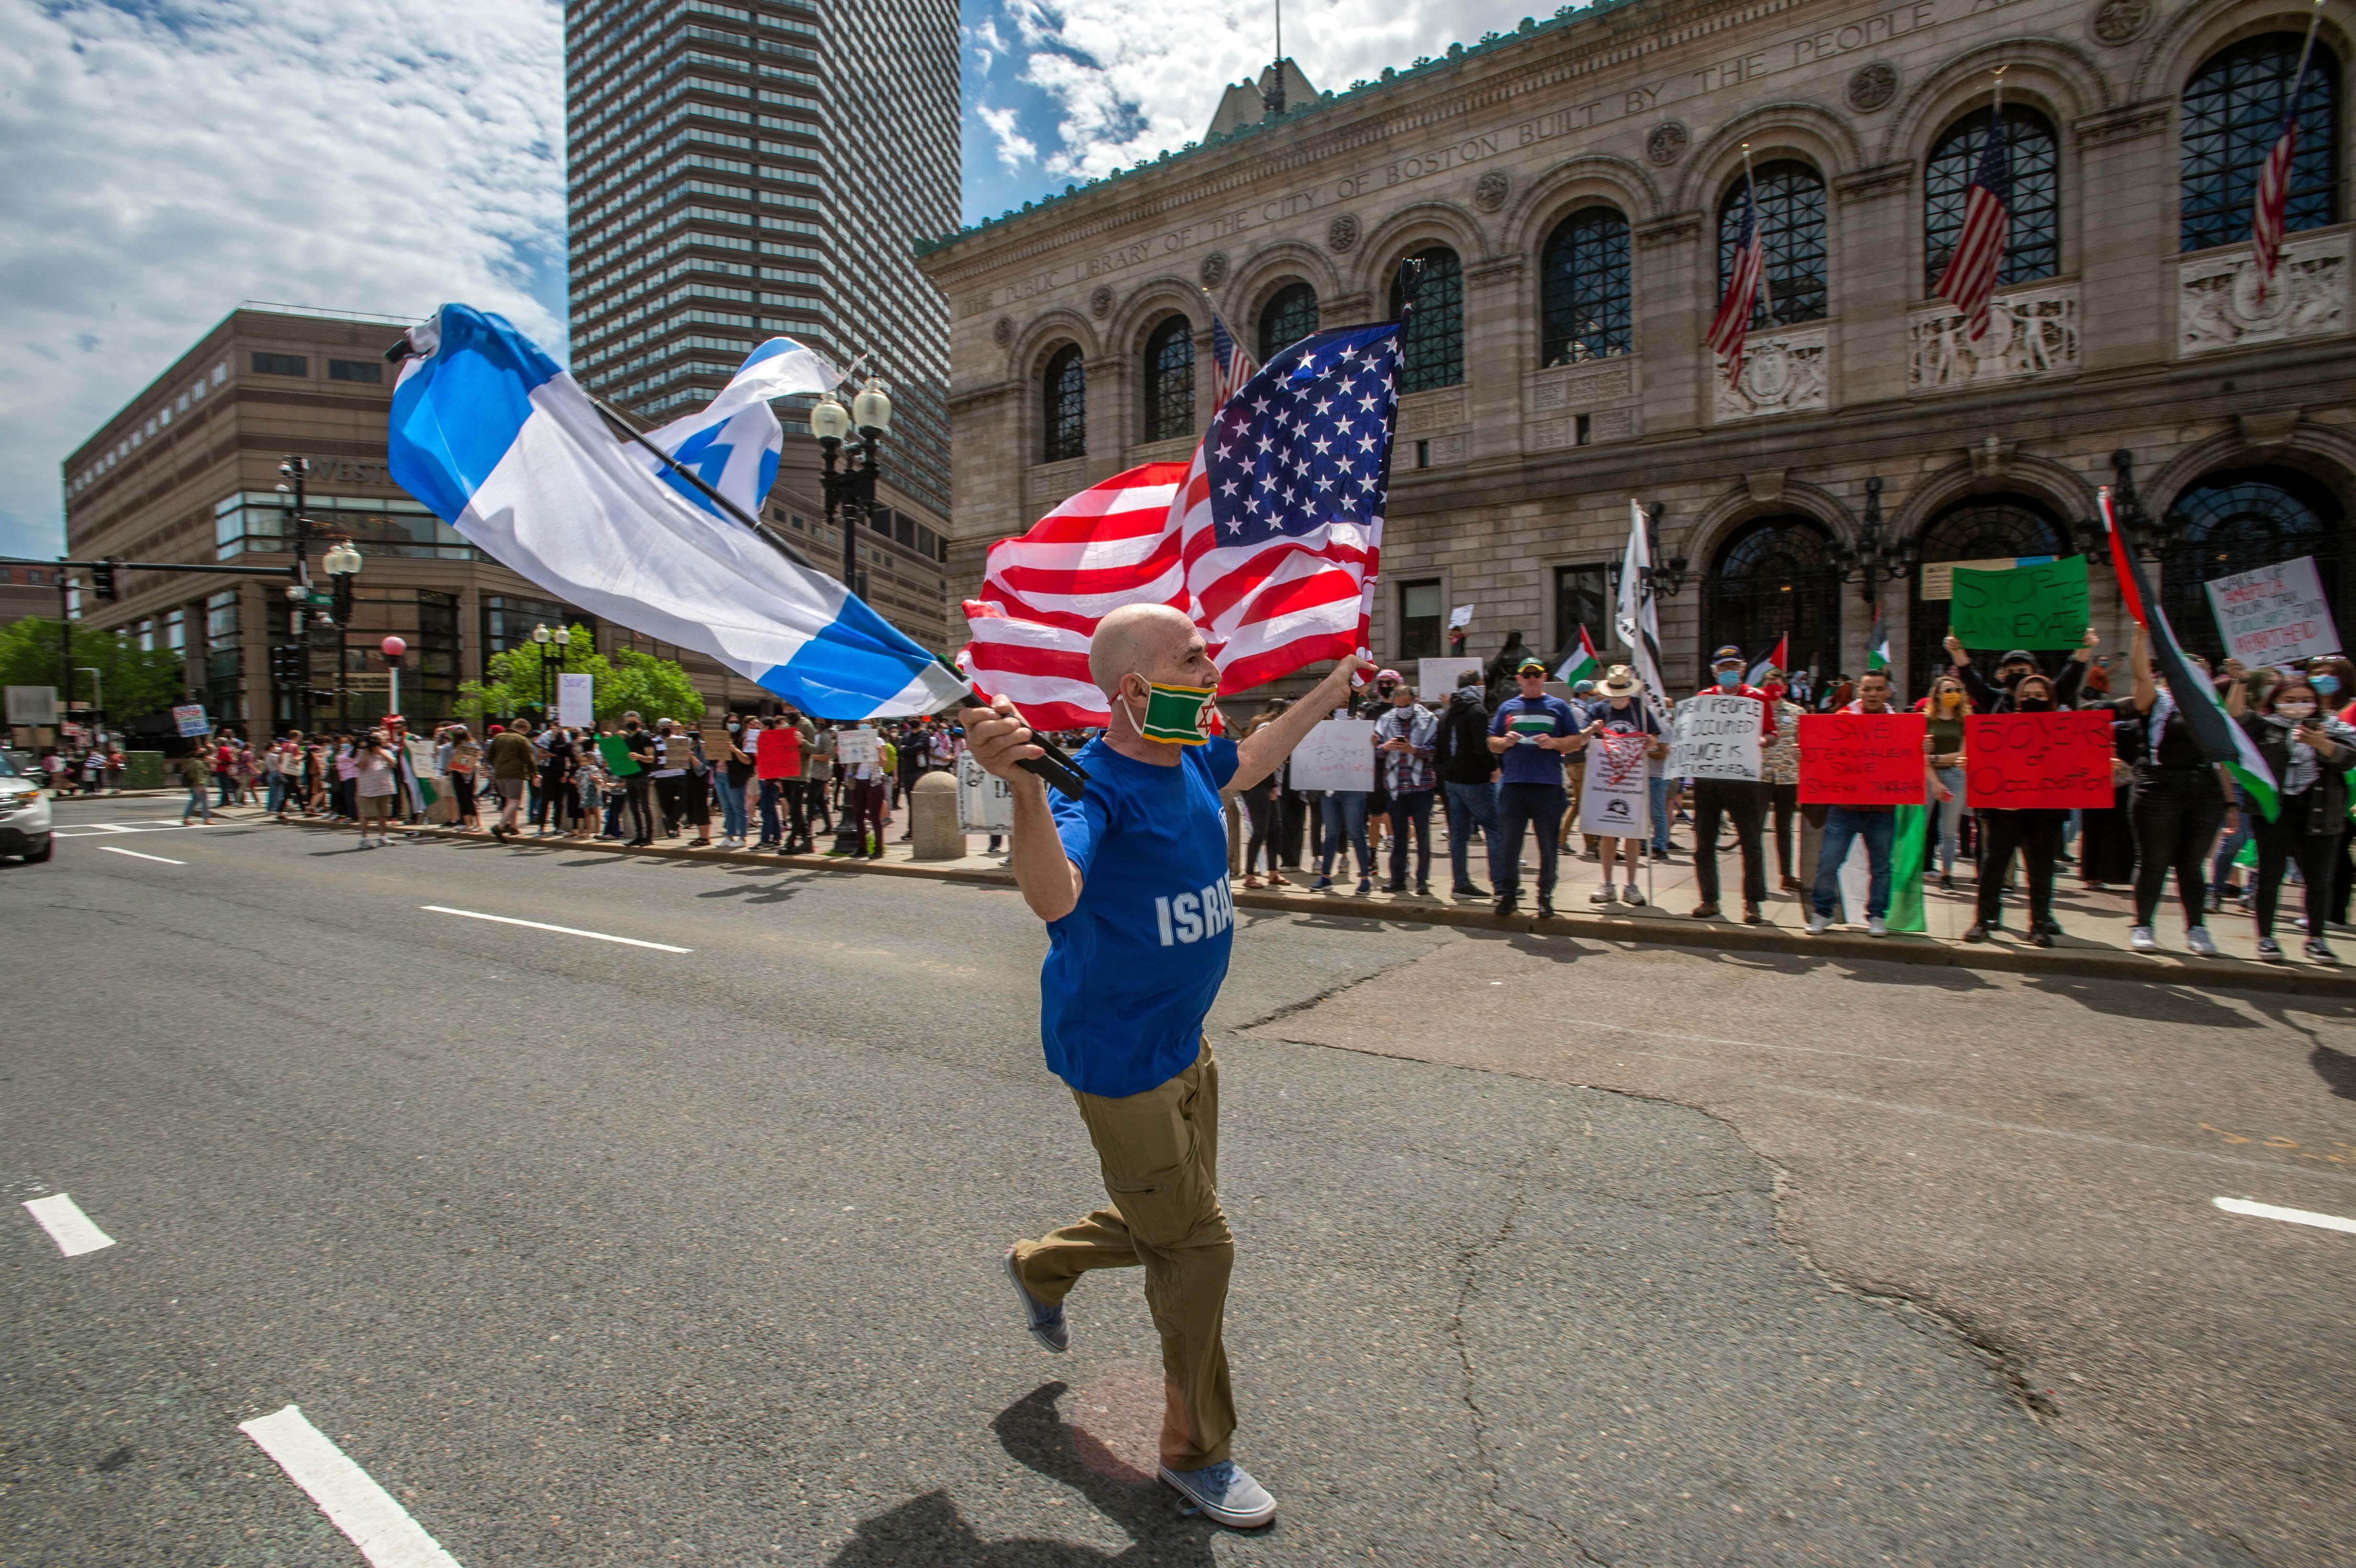 A man, claiming to have been a member of the Israeli army for 32 years, runs waving the flags of Israel and the US at a rally in support of Palestine in Copley Square in Boston, Massachusetts, May 15